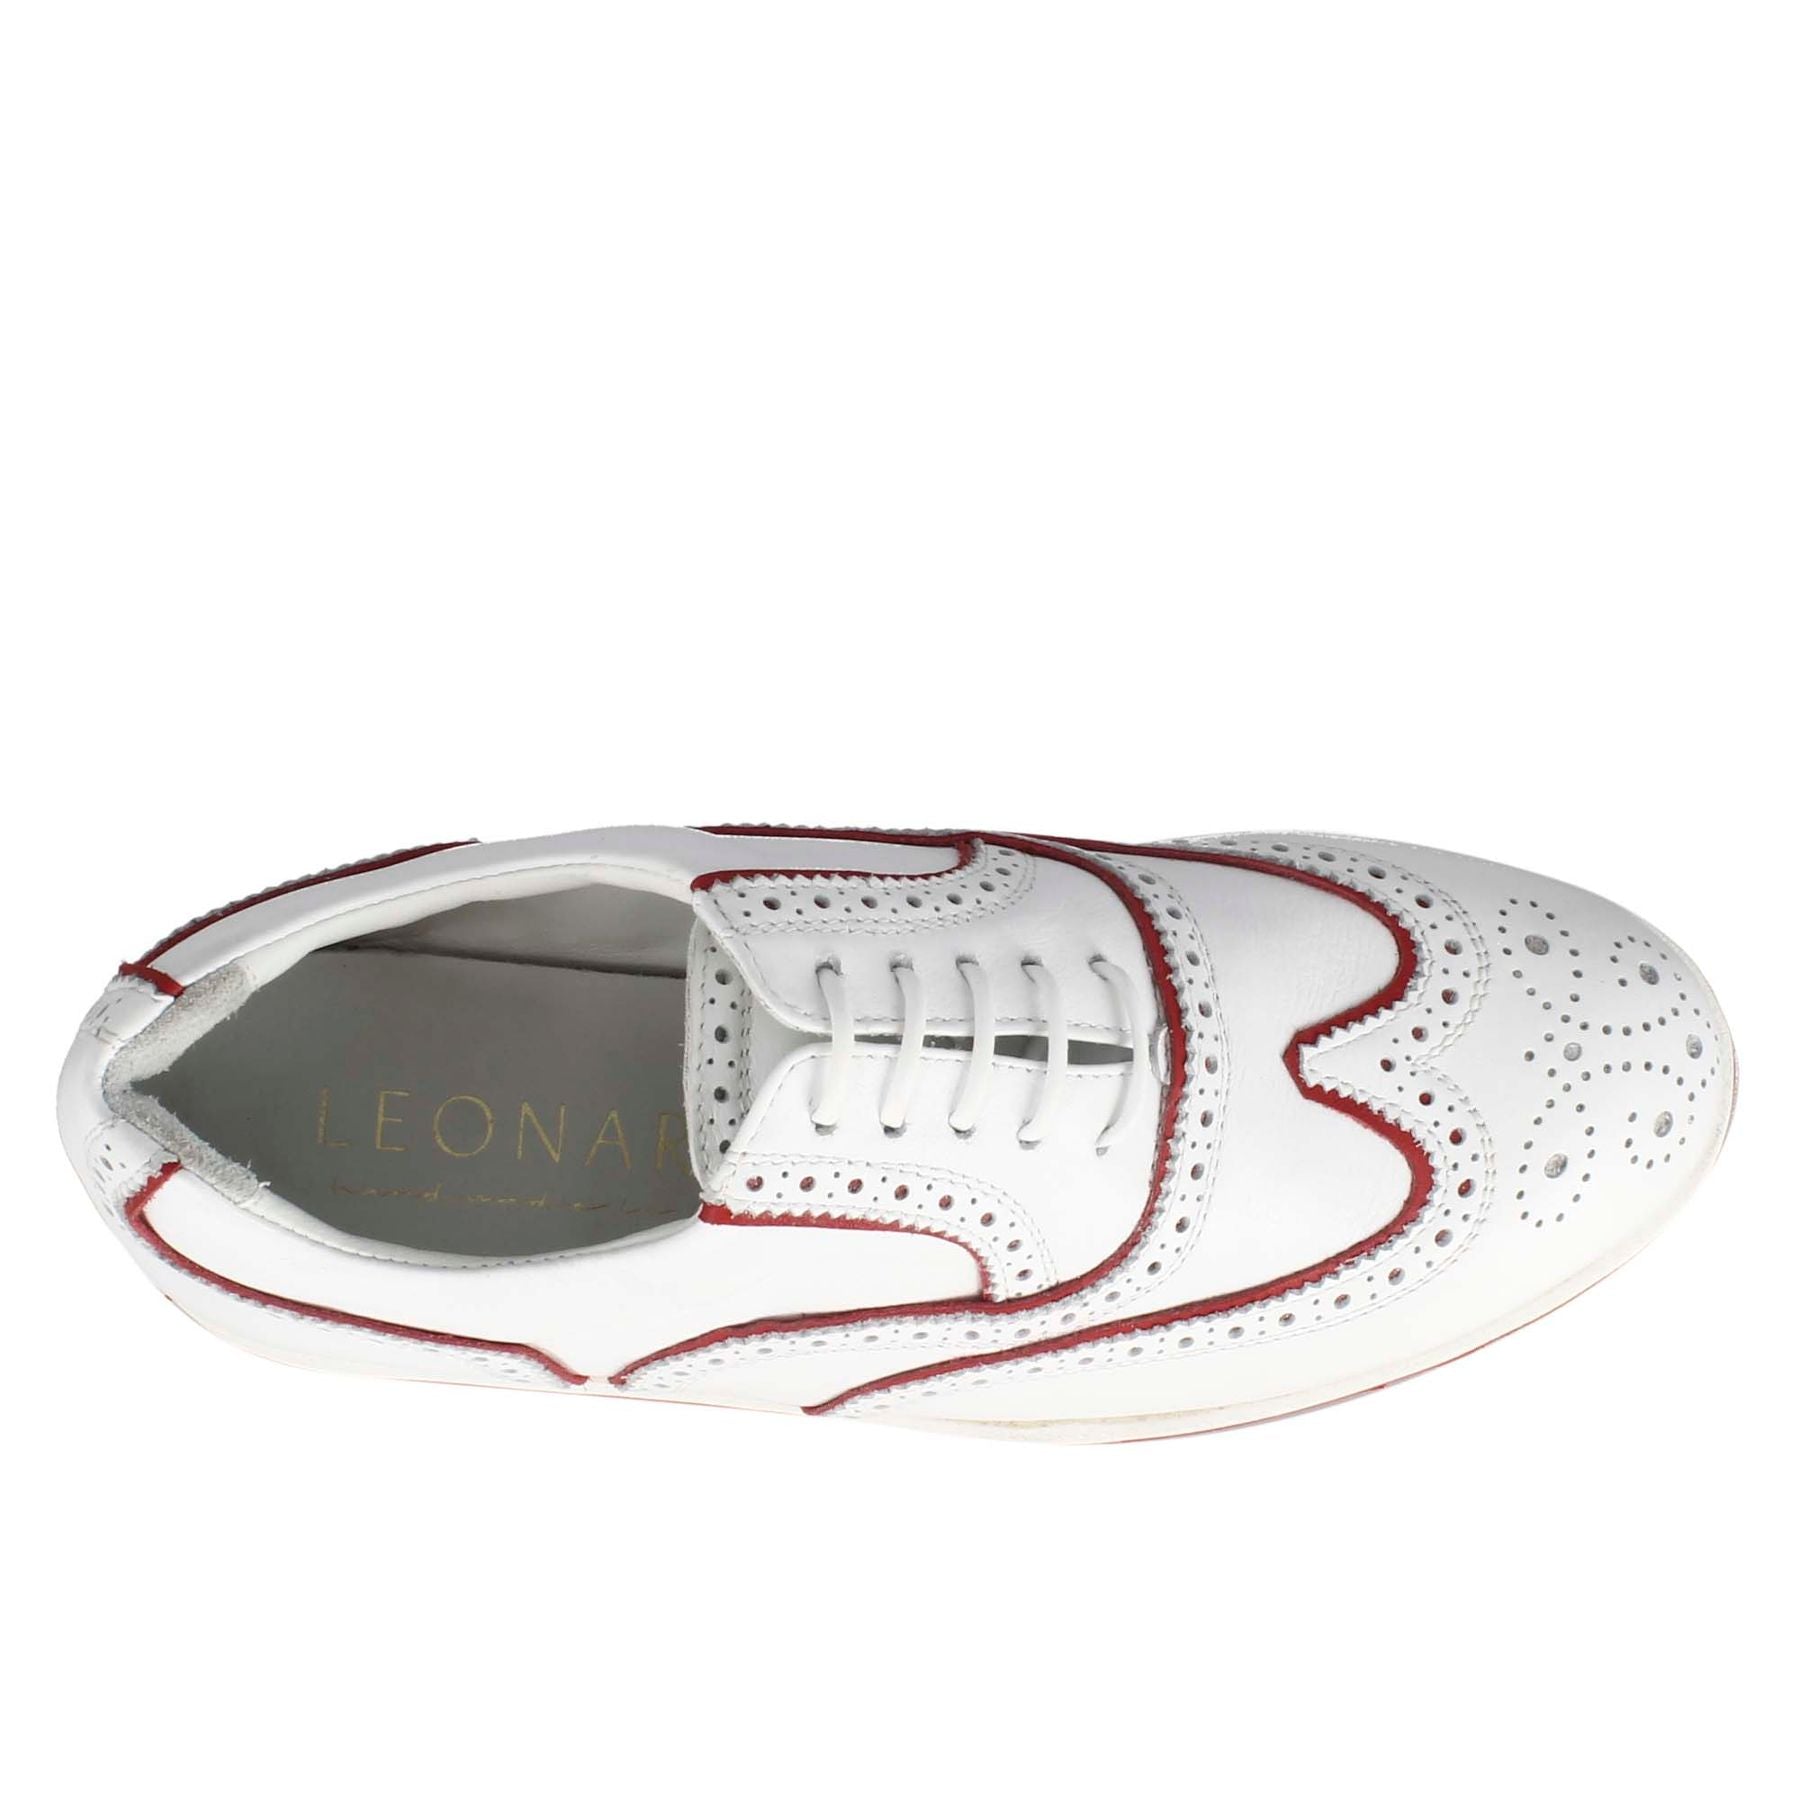 Handmade men's golf shoes in white leather with red details